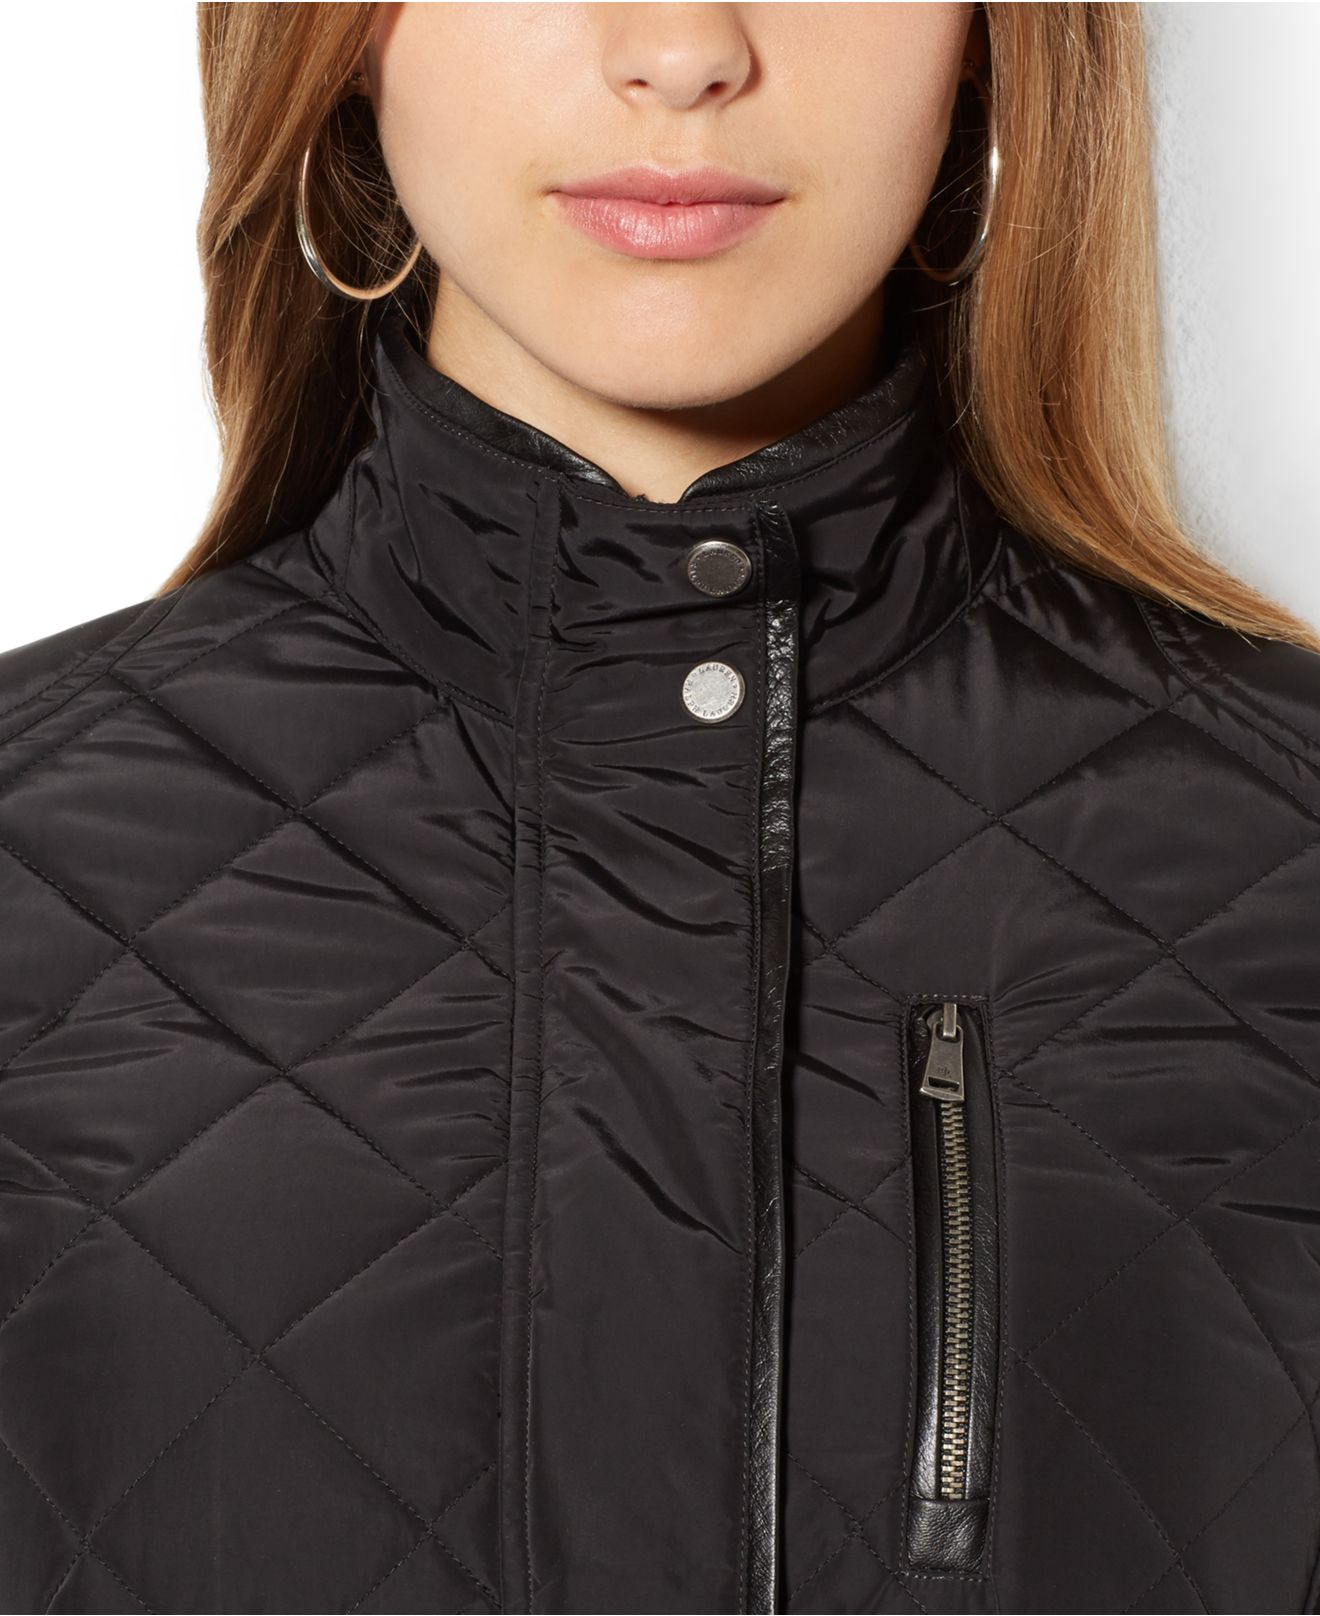 Lauren Ralph Lauren Plus Size Faux Leather Trim Quilted Utility Jacket Wortersee Public Relations Discover our collection of tailored jackets, tuxedos and more. wortersee public relations